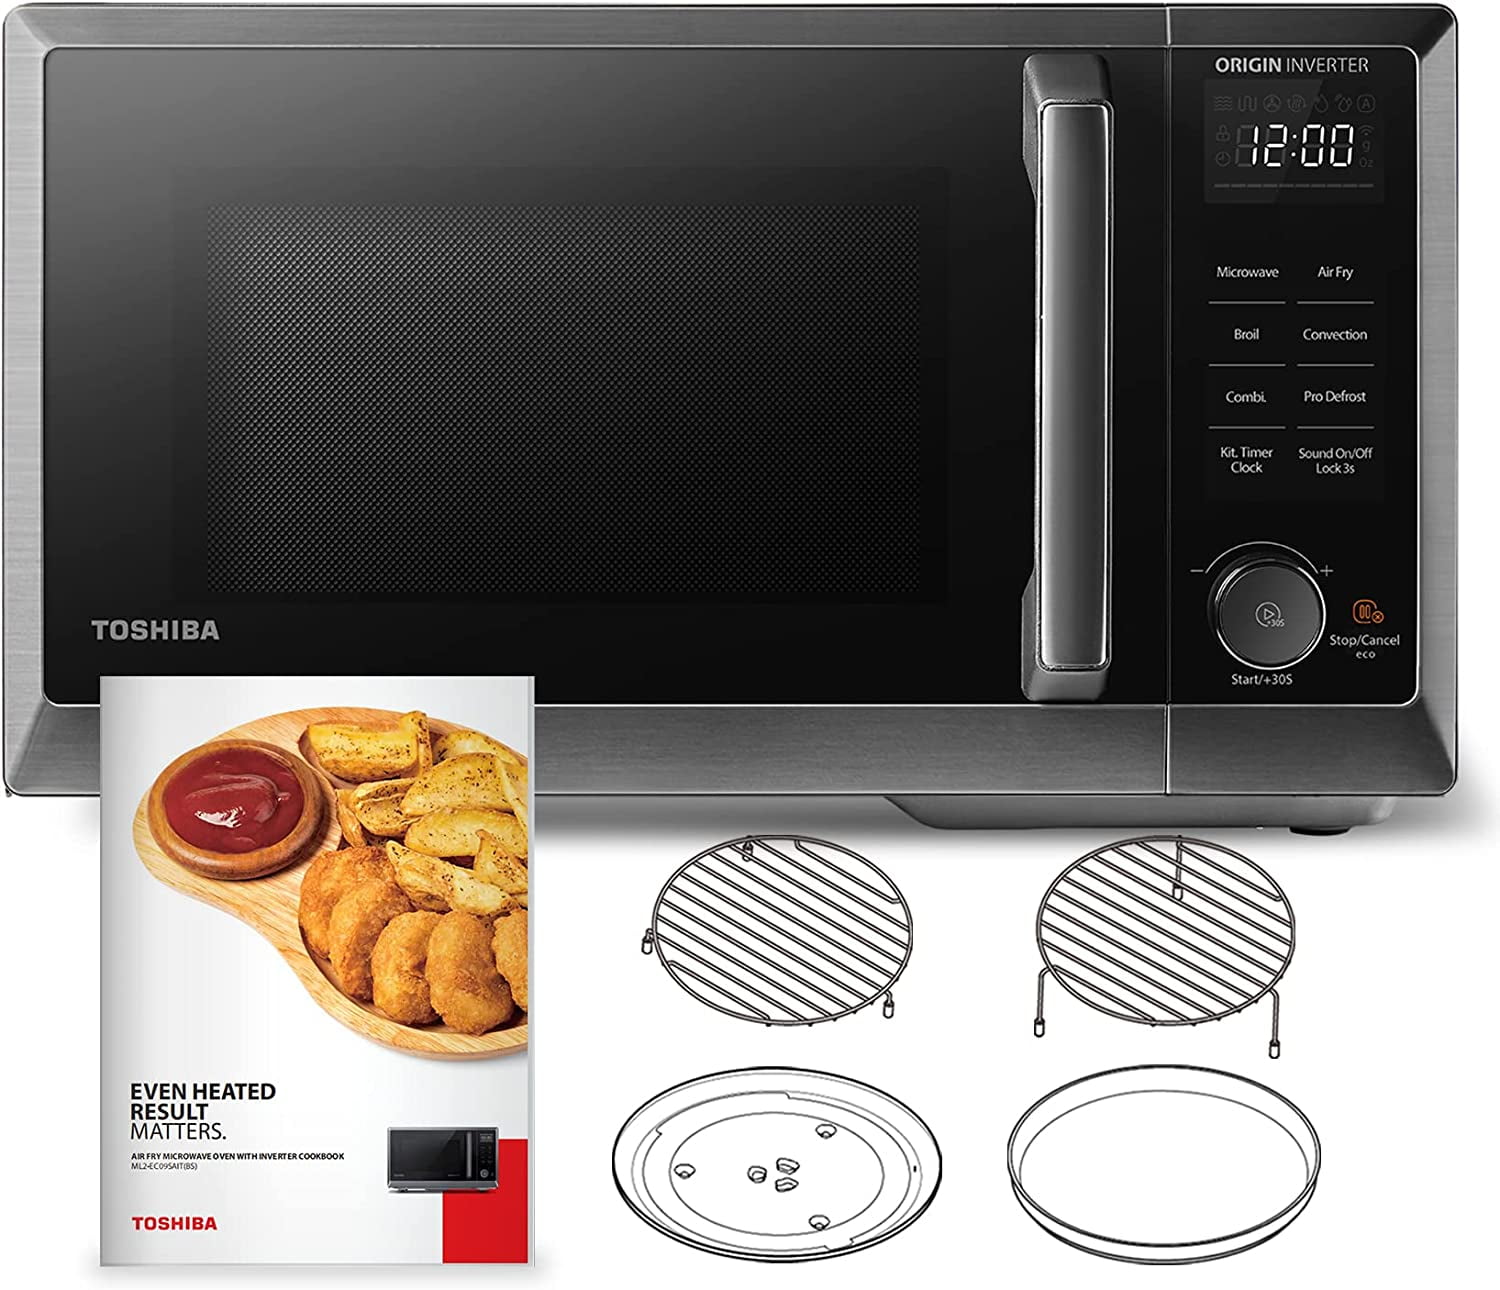 TOSHIBA 7-in-1 Countertop Microwave Oven Air Fryer Combo, Inverter,  Convection, Broil, Speedy Combi, Even Defrost, Humidity Sensor, 27 Auto  Menu&47 Recipes, 1.0 cu.ft/30QT, 1000W Stainless Steel